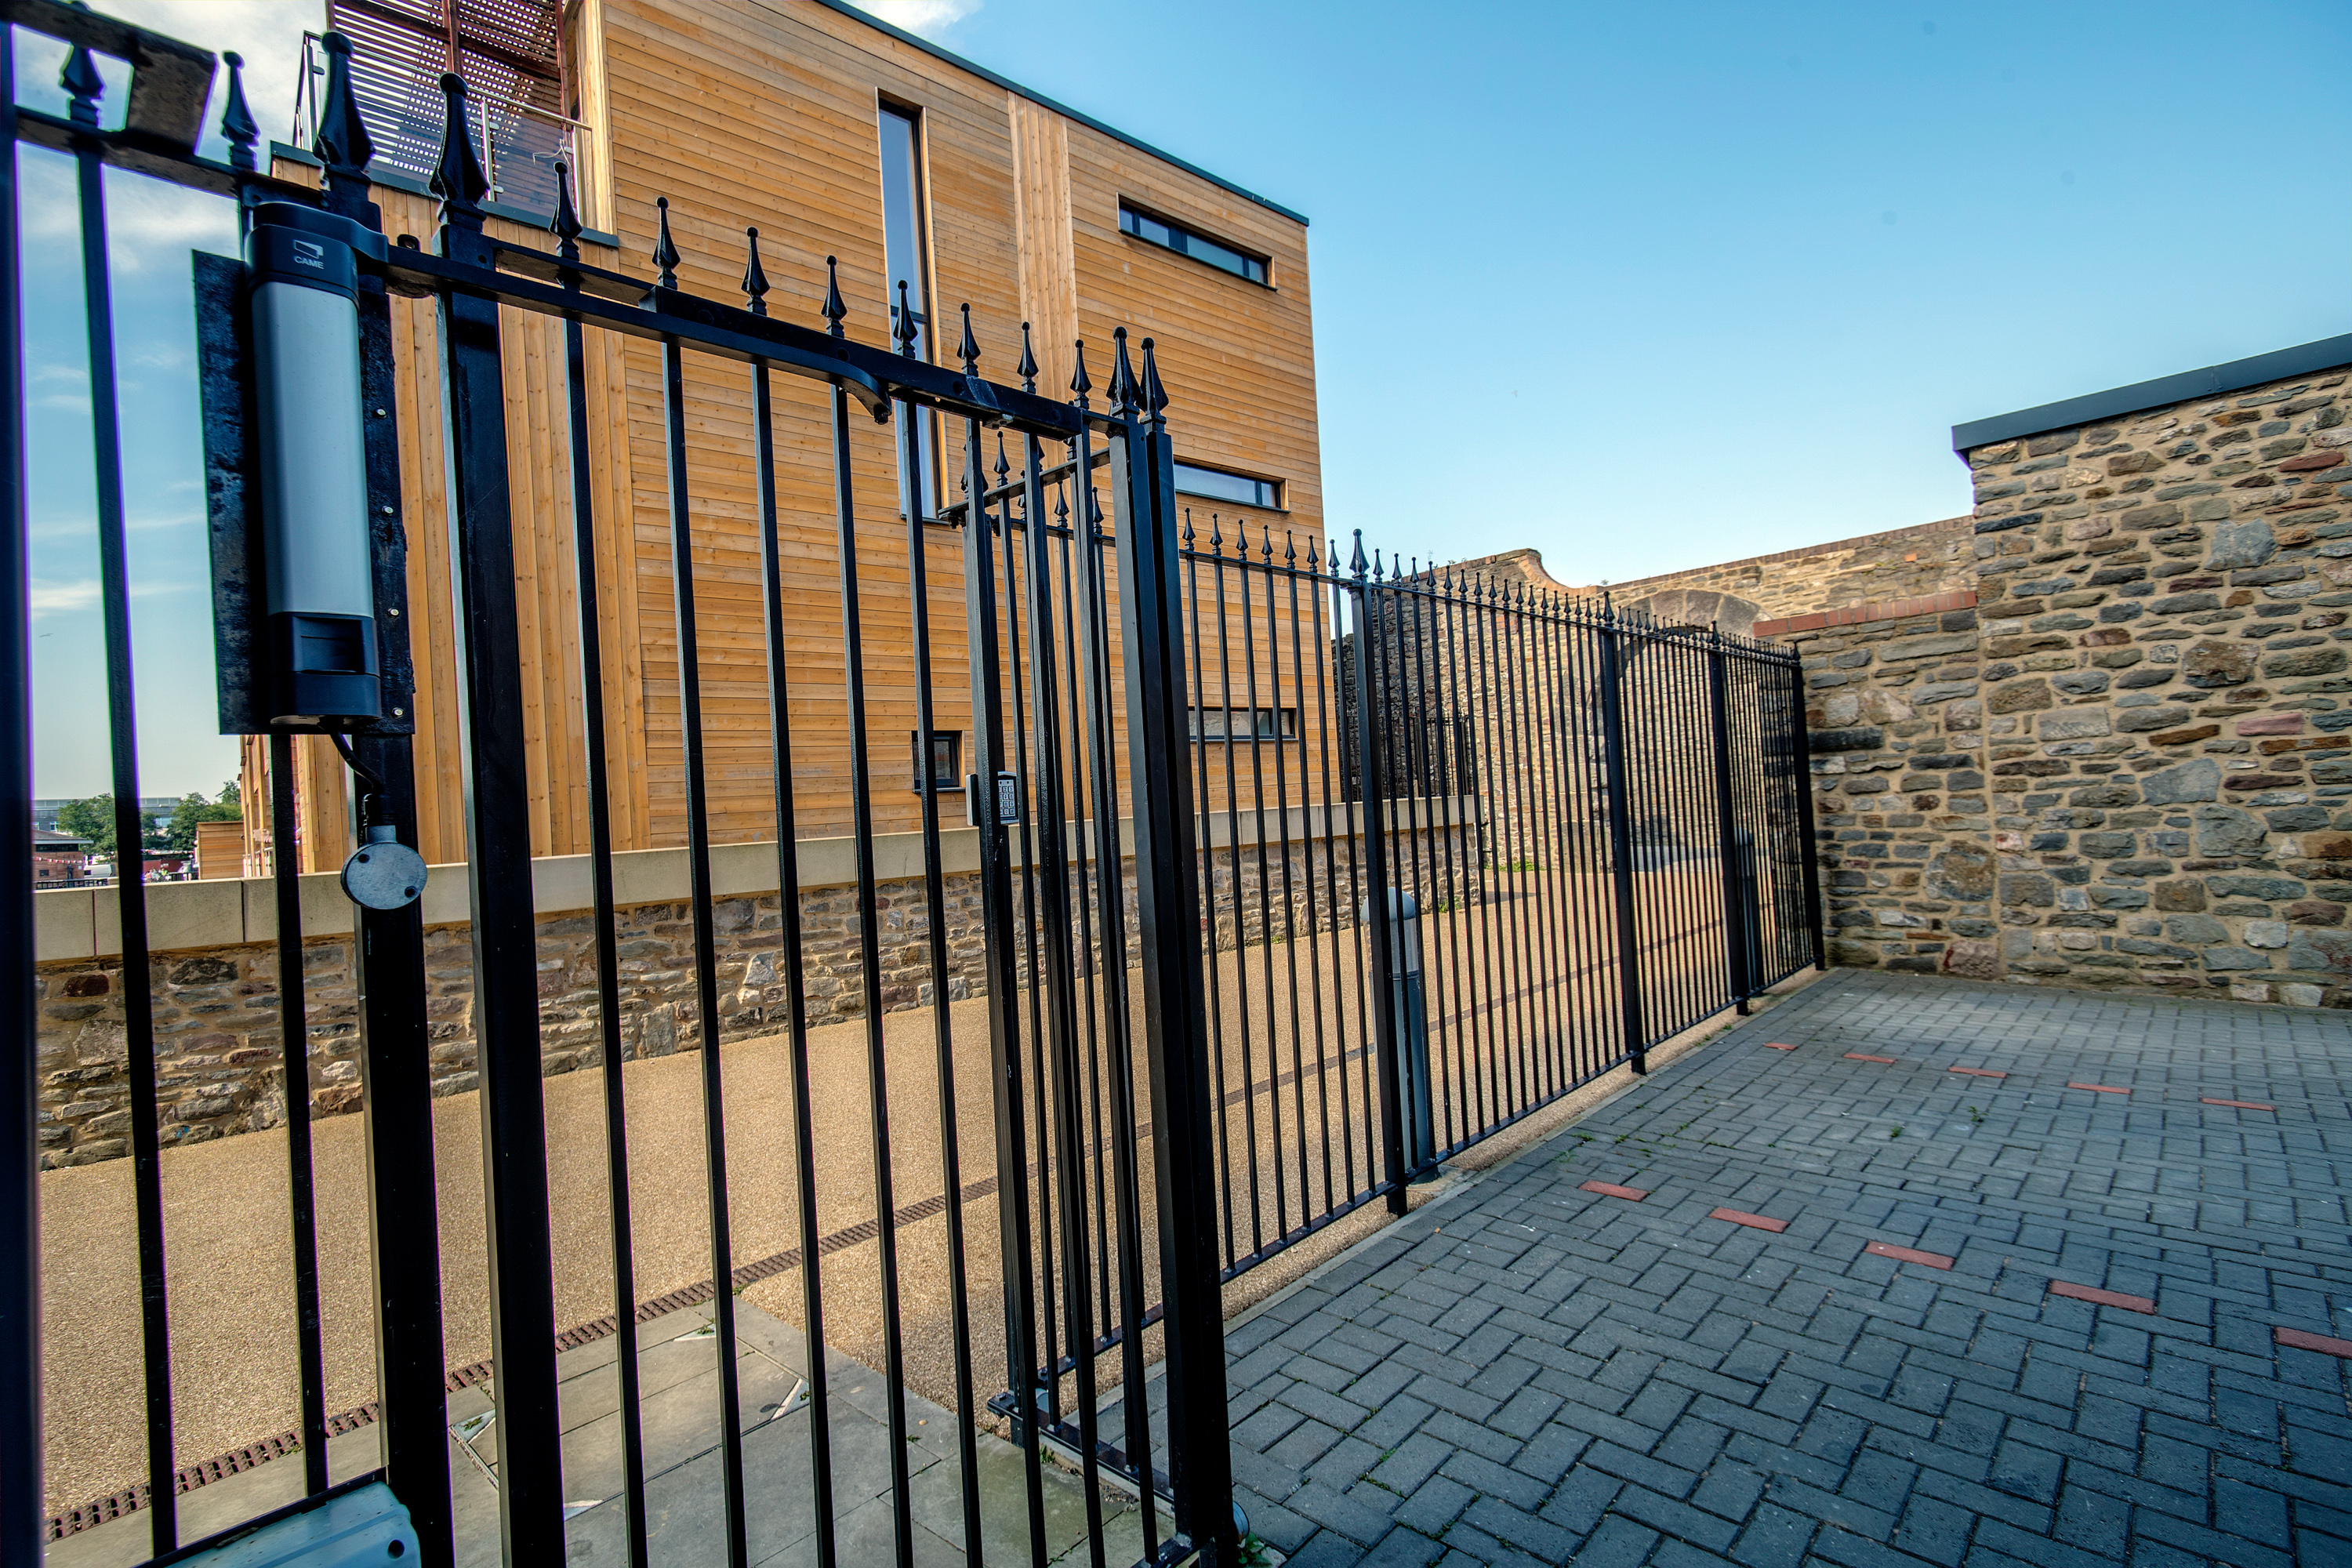 residential and commercial fencing and pedestrian gates and access